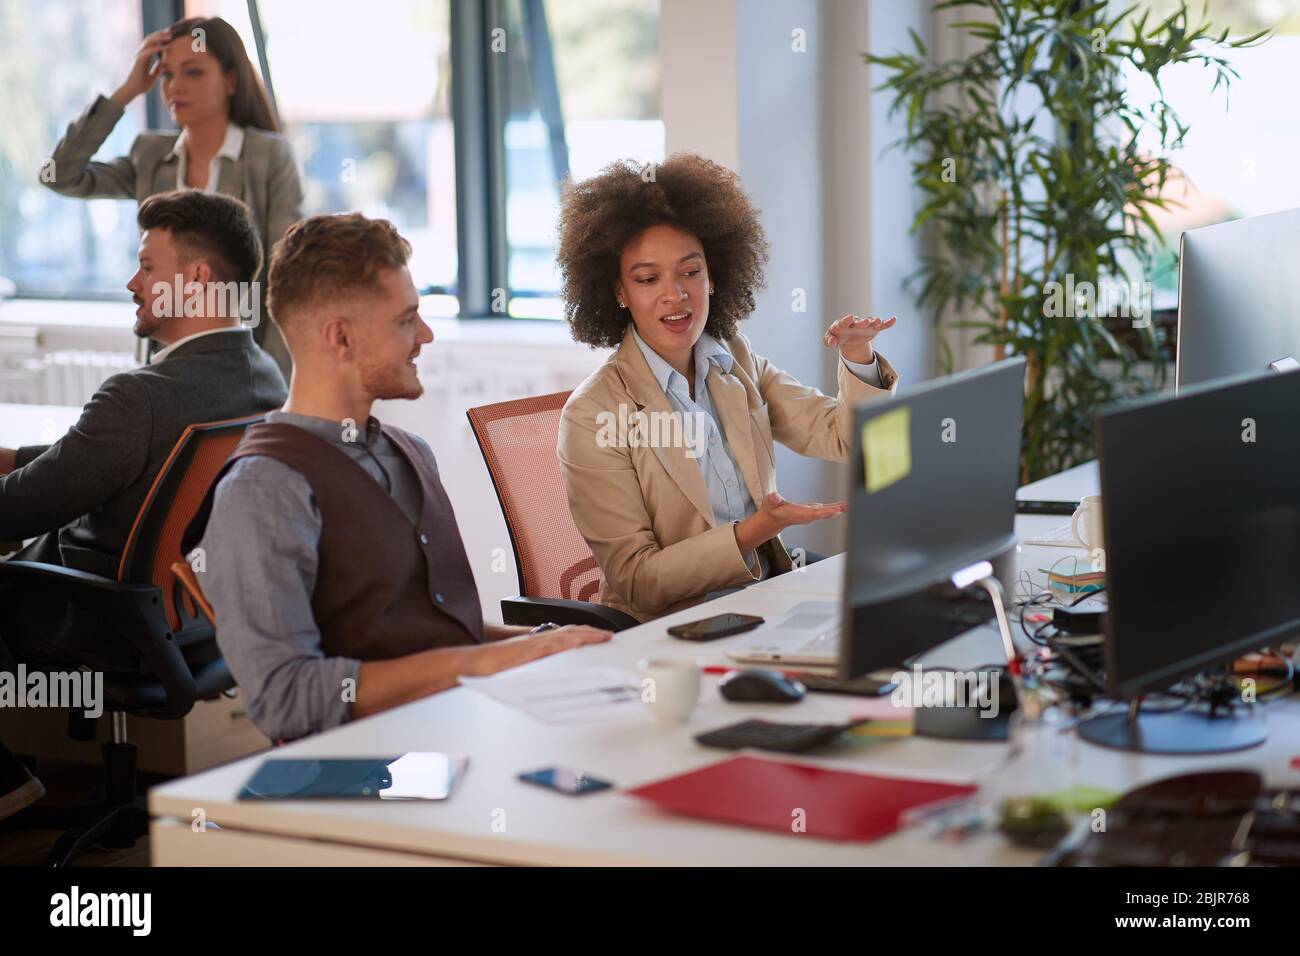 Sharing ideas between teammates ensures productivity, business concept Stock Photo